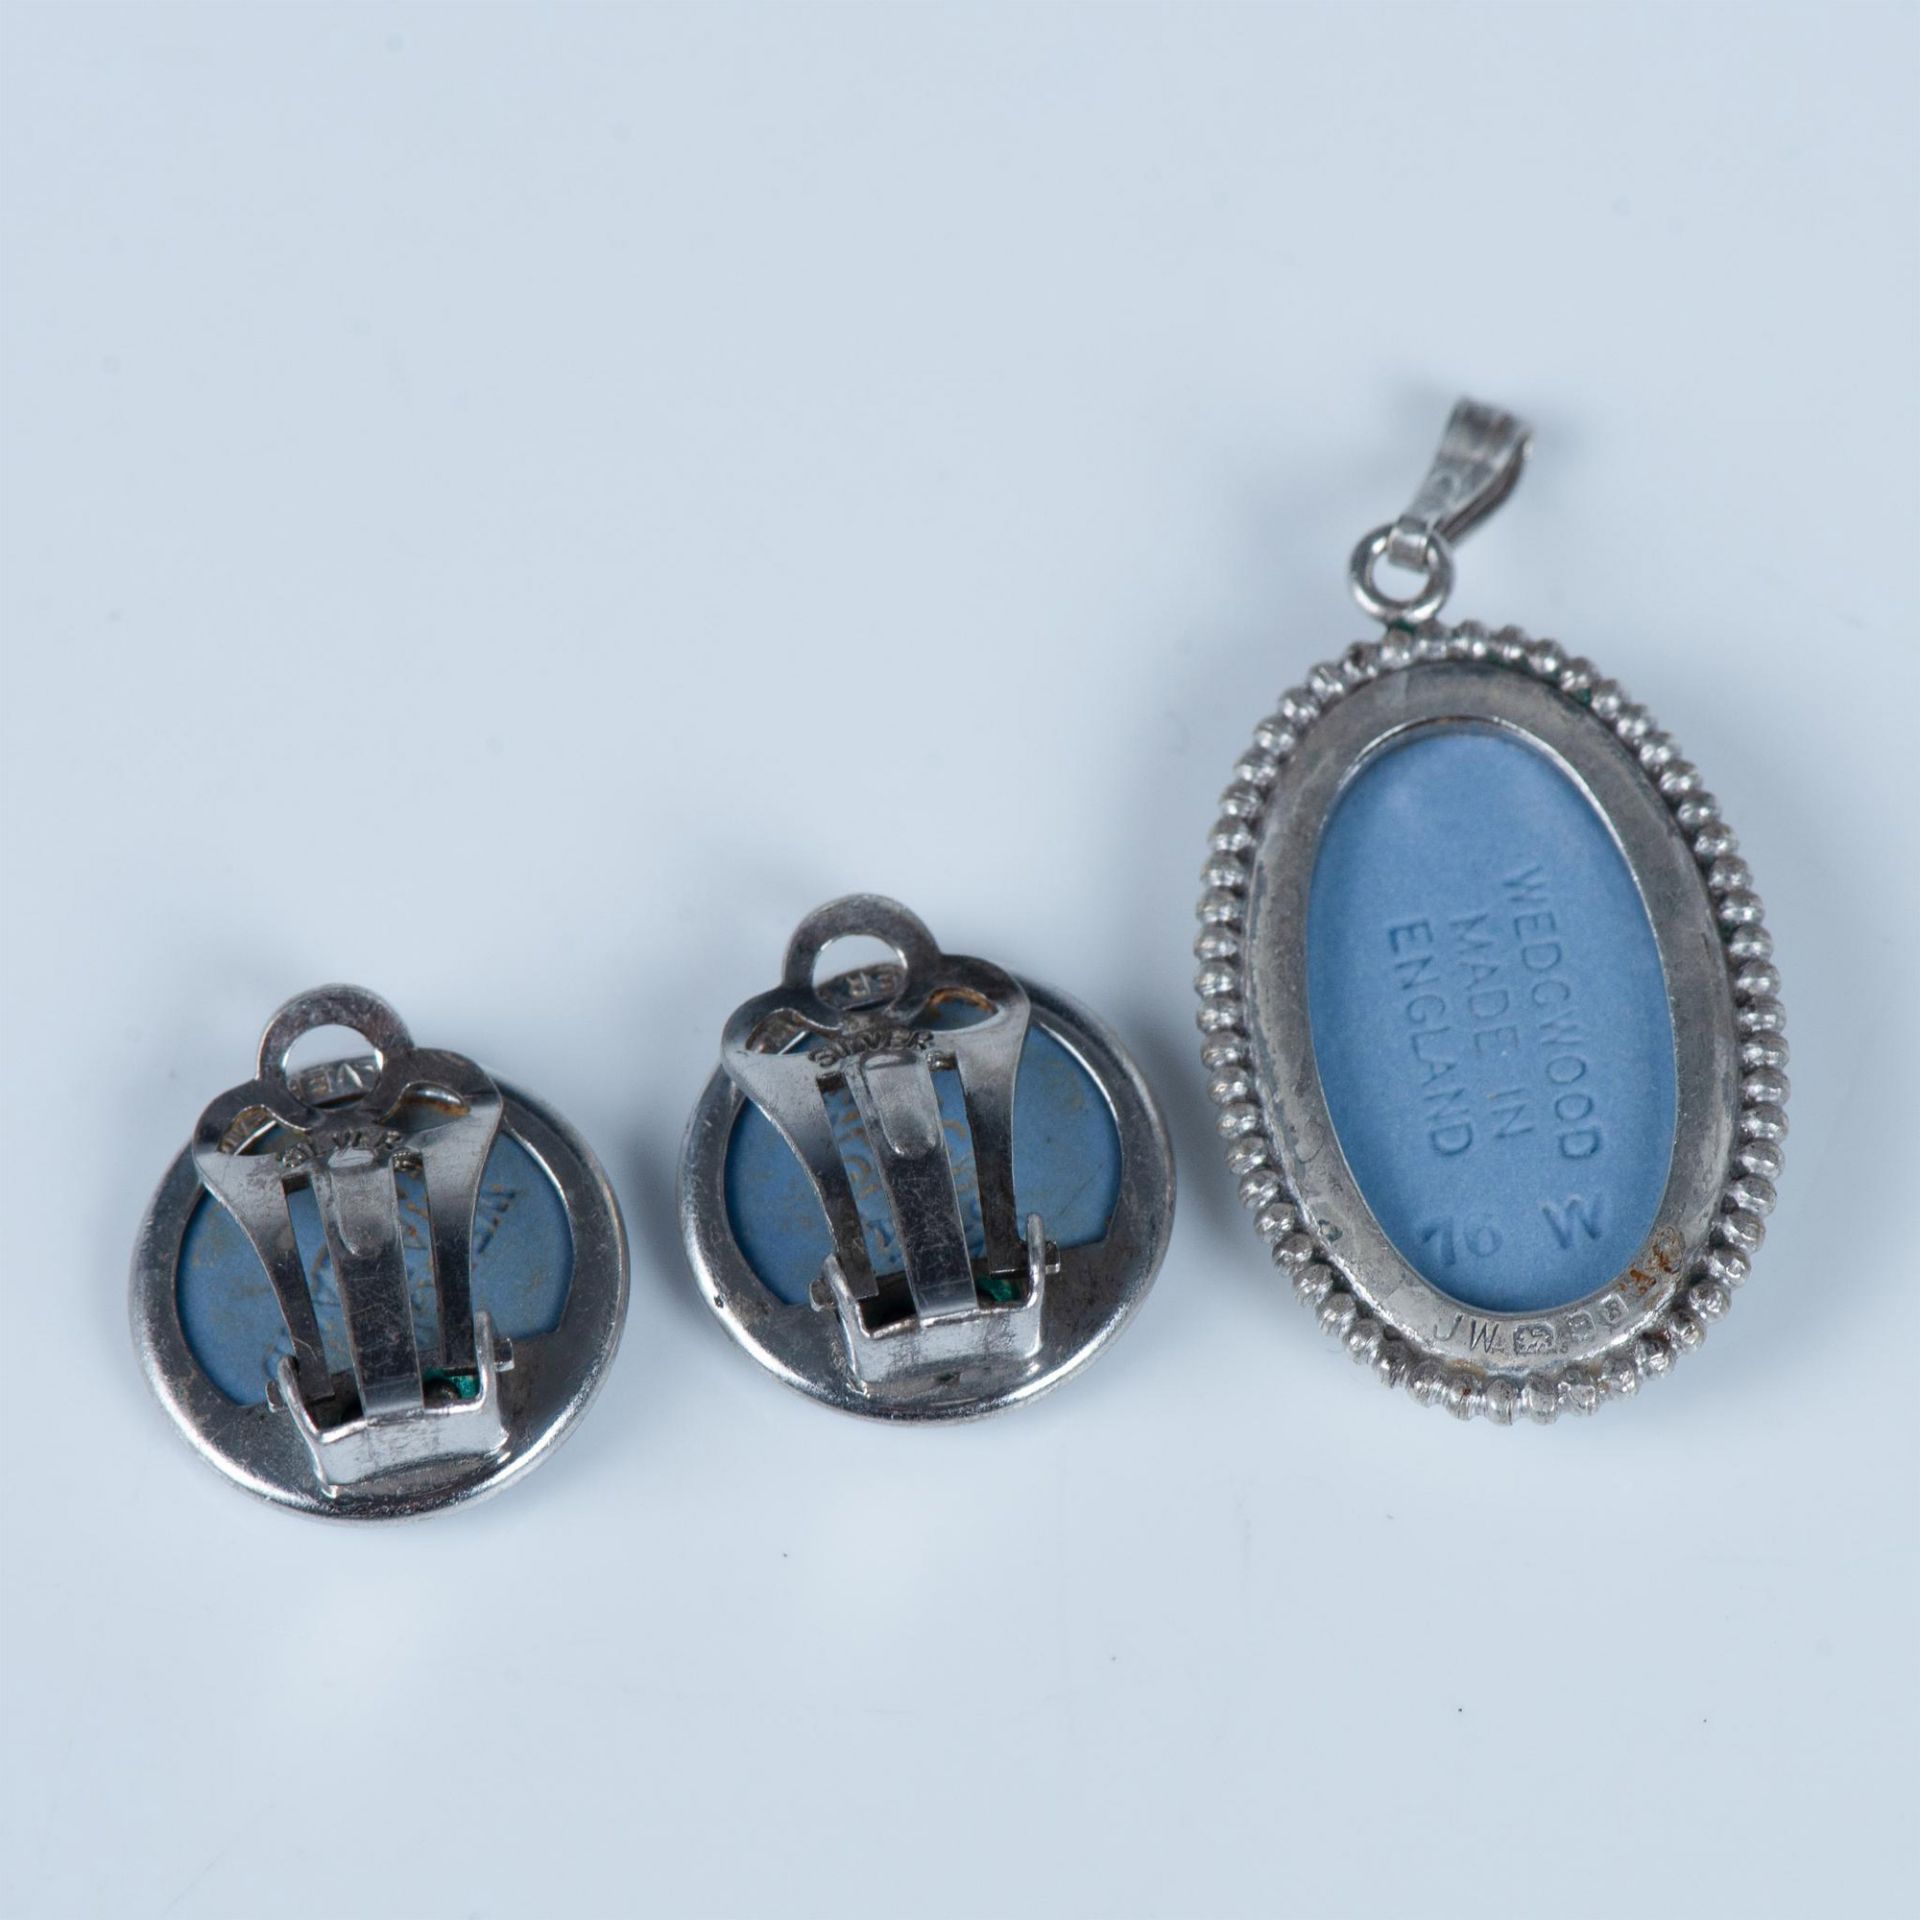 2pc Wedgwood Sterling Silver Clip-On Earrings and Pendant Set - Image 2 of 5